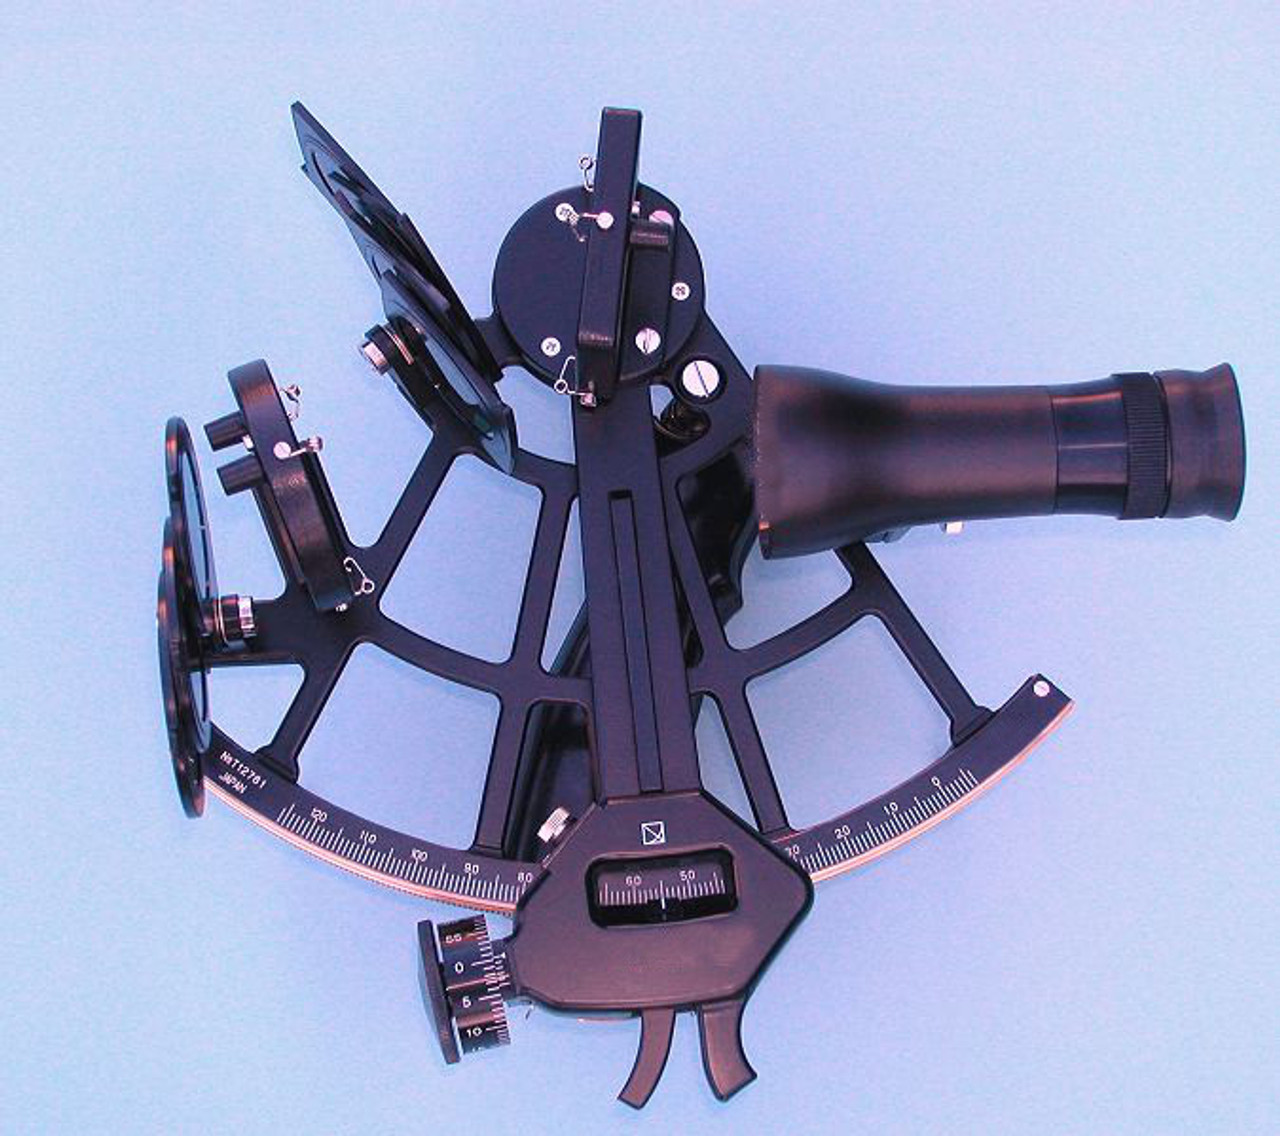 IMPA 370332 Sextant 4x40 w.light in chest